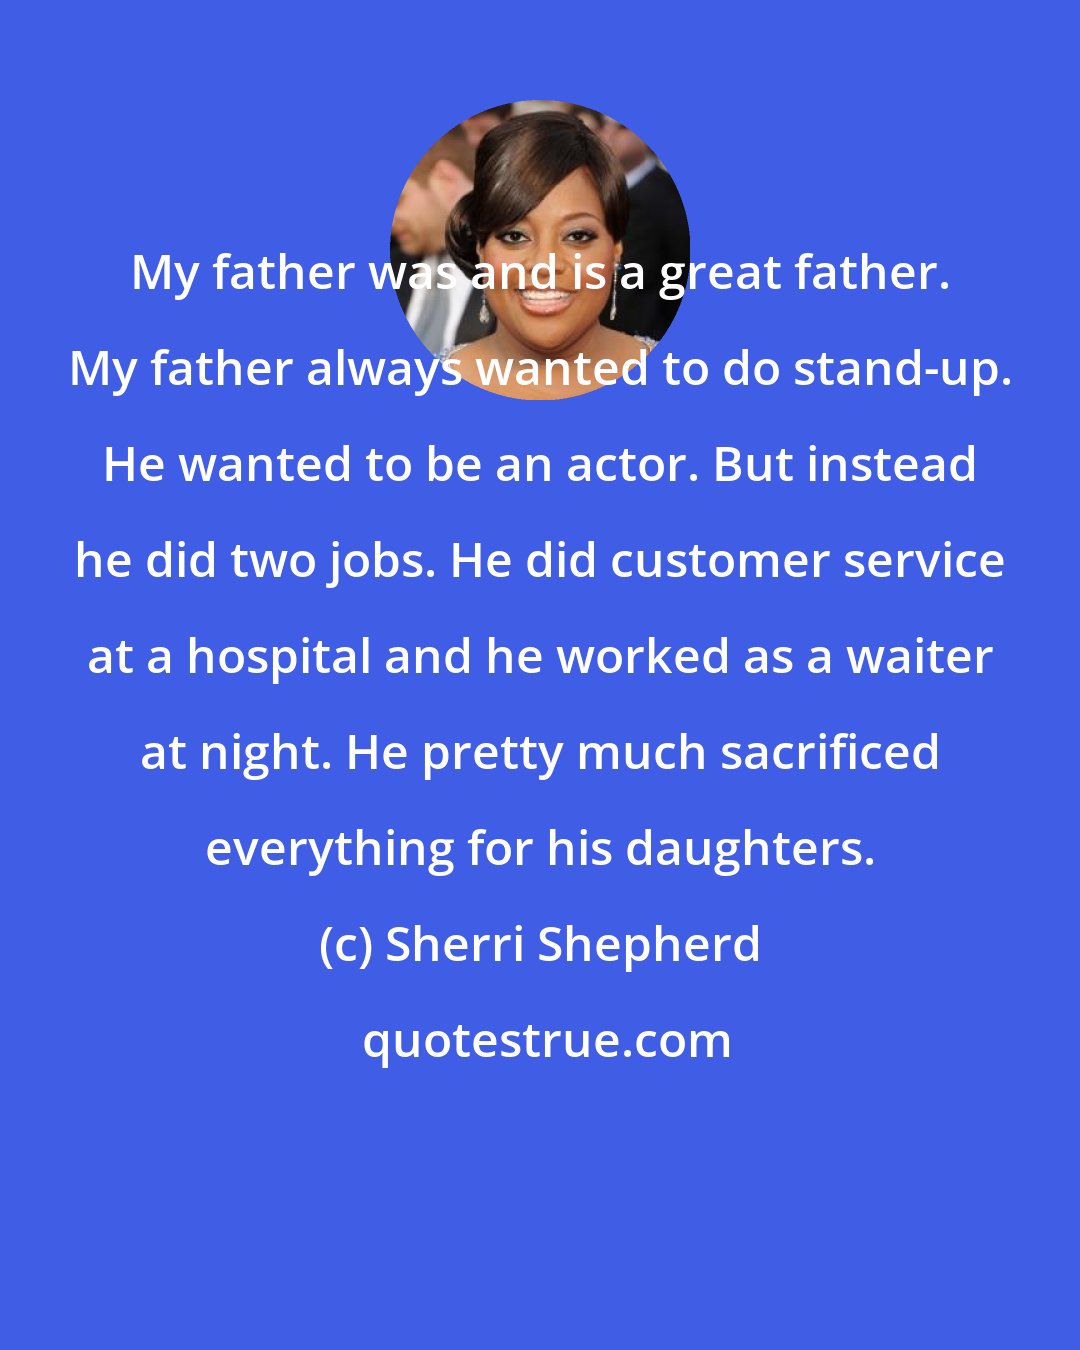 Sherri Shepherd: My father was and is a great father. My father always wanted to do stand-up. He wanted to be an actor. But instead he did two jobs. He did customer service at a hospital and he worked as a waiter at night. He pretty much sacrificed everything for his daughters.